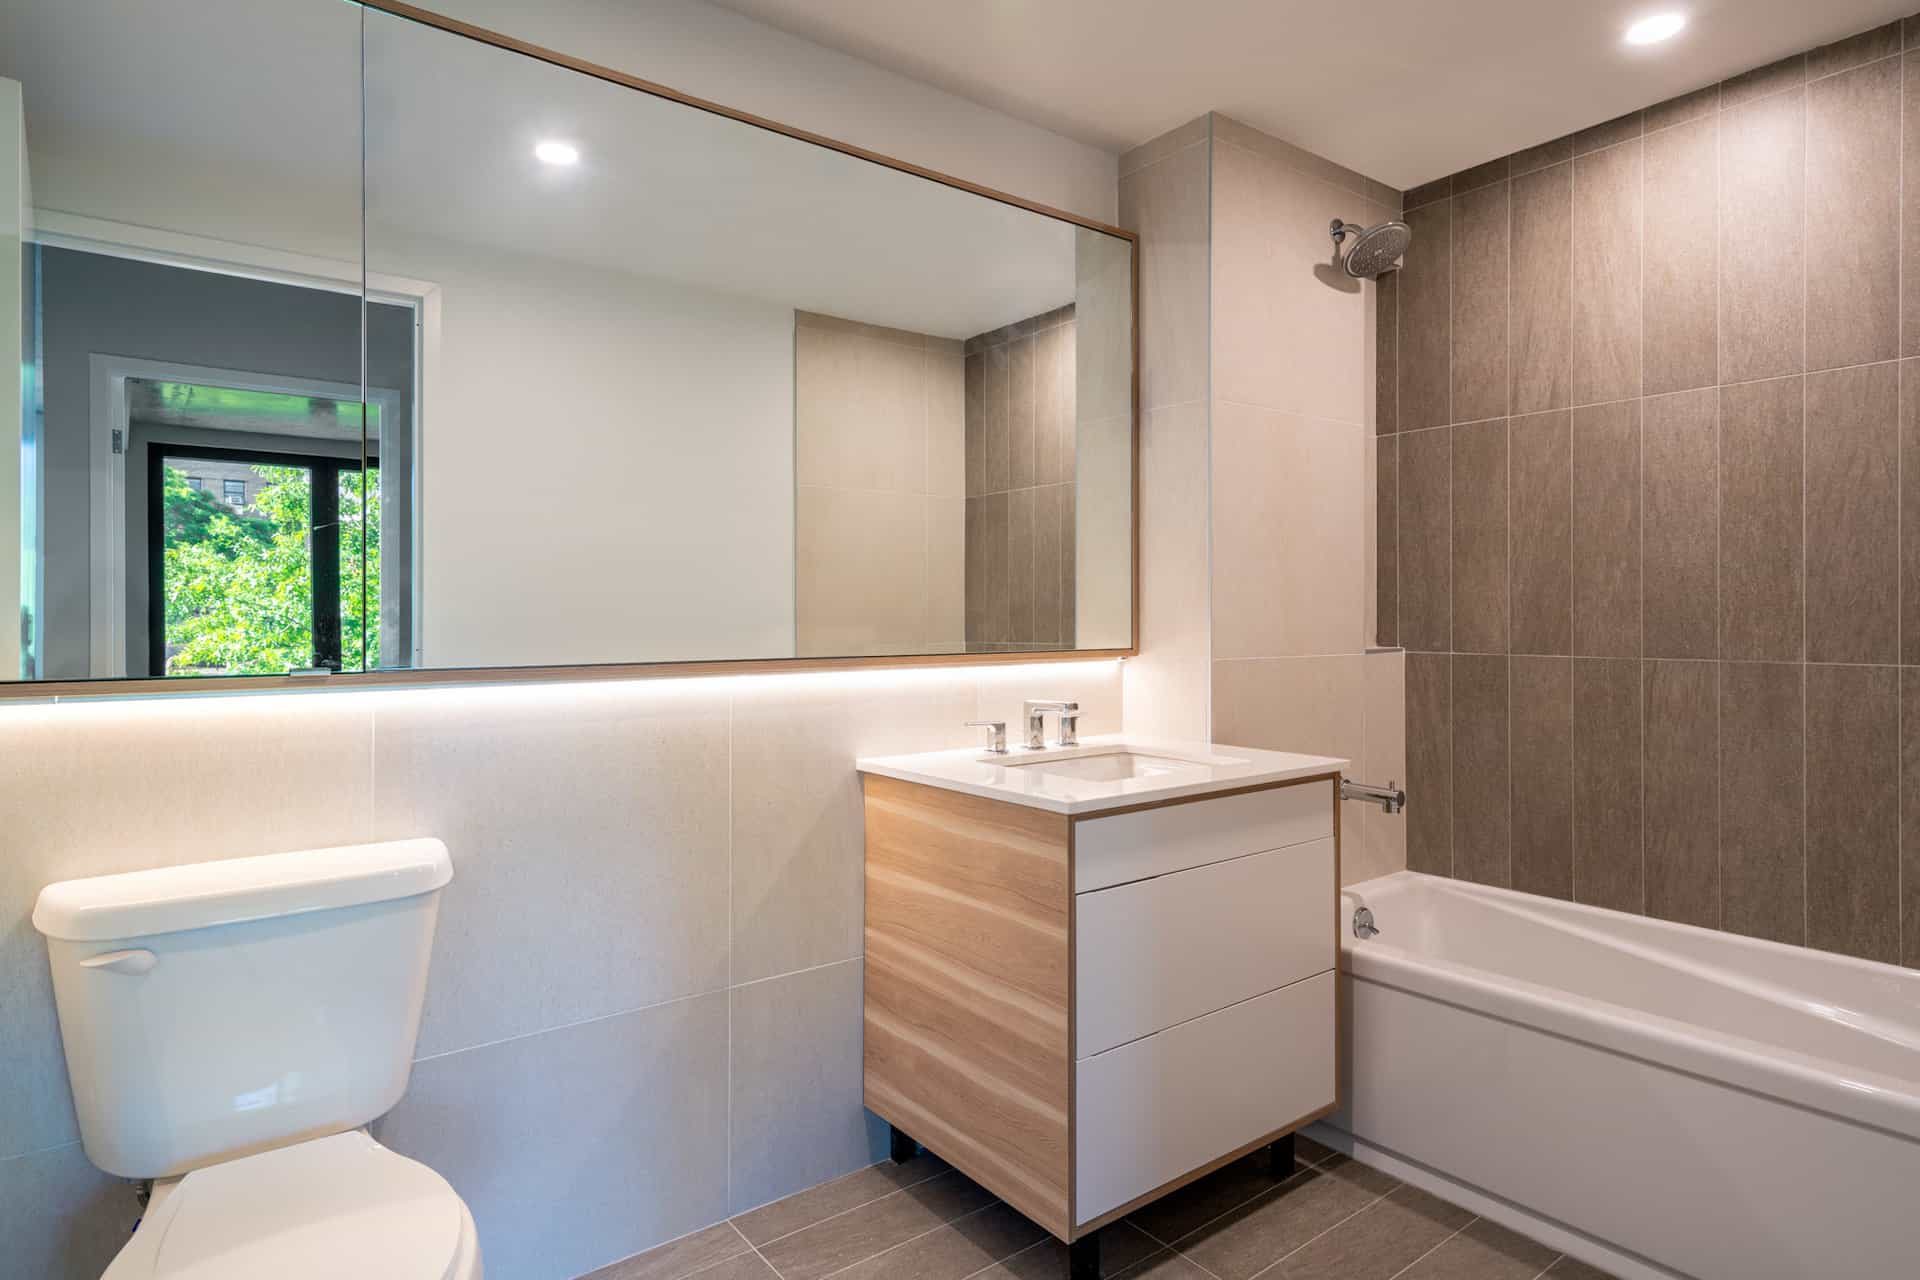 Bathroom at 222 Johnson Avenue apartments with a single vanity, large mirror, tile walls and a soaking tub with shower.